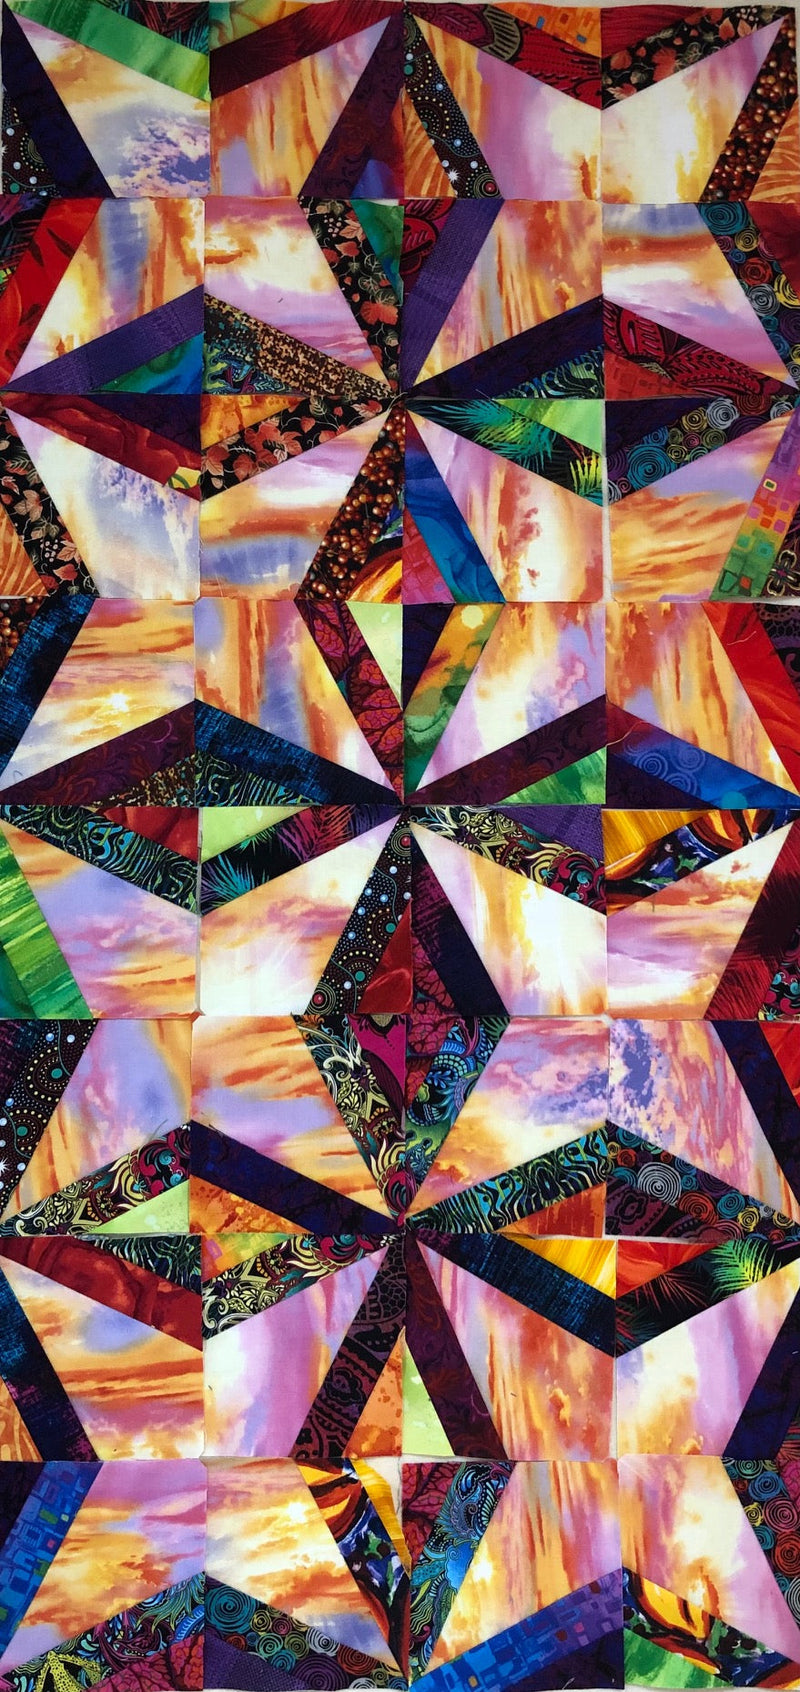 A Quilters Lumberyard Presents: A Collection of Kites, Saturday, August 17th